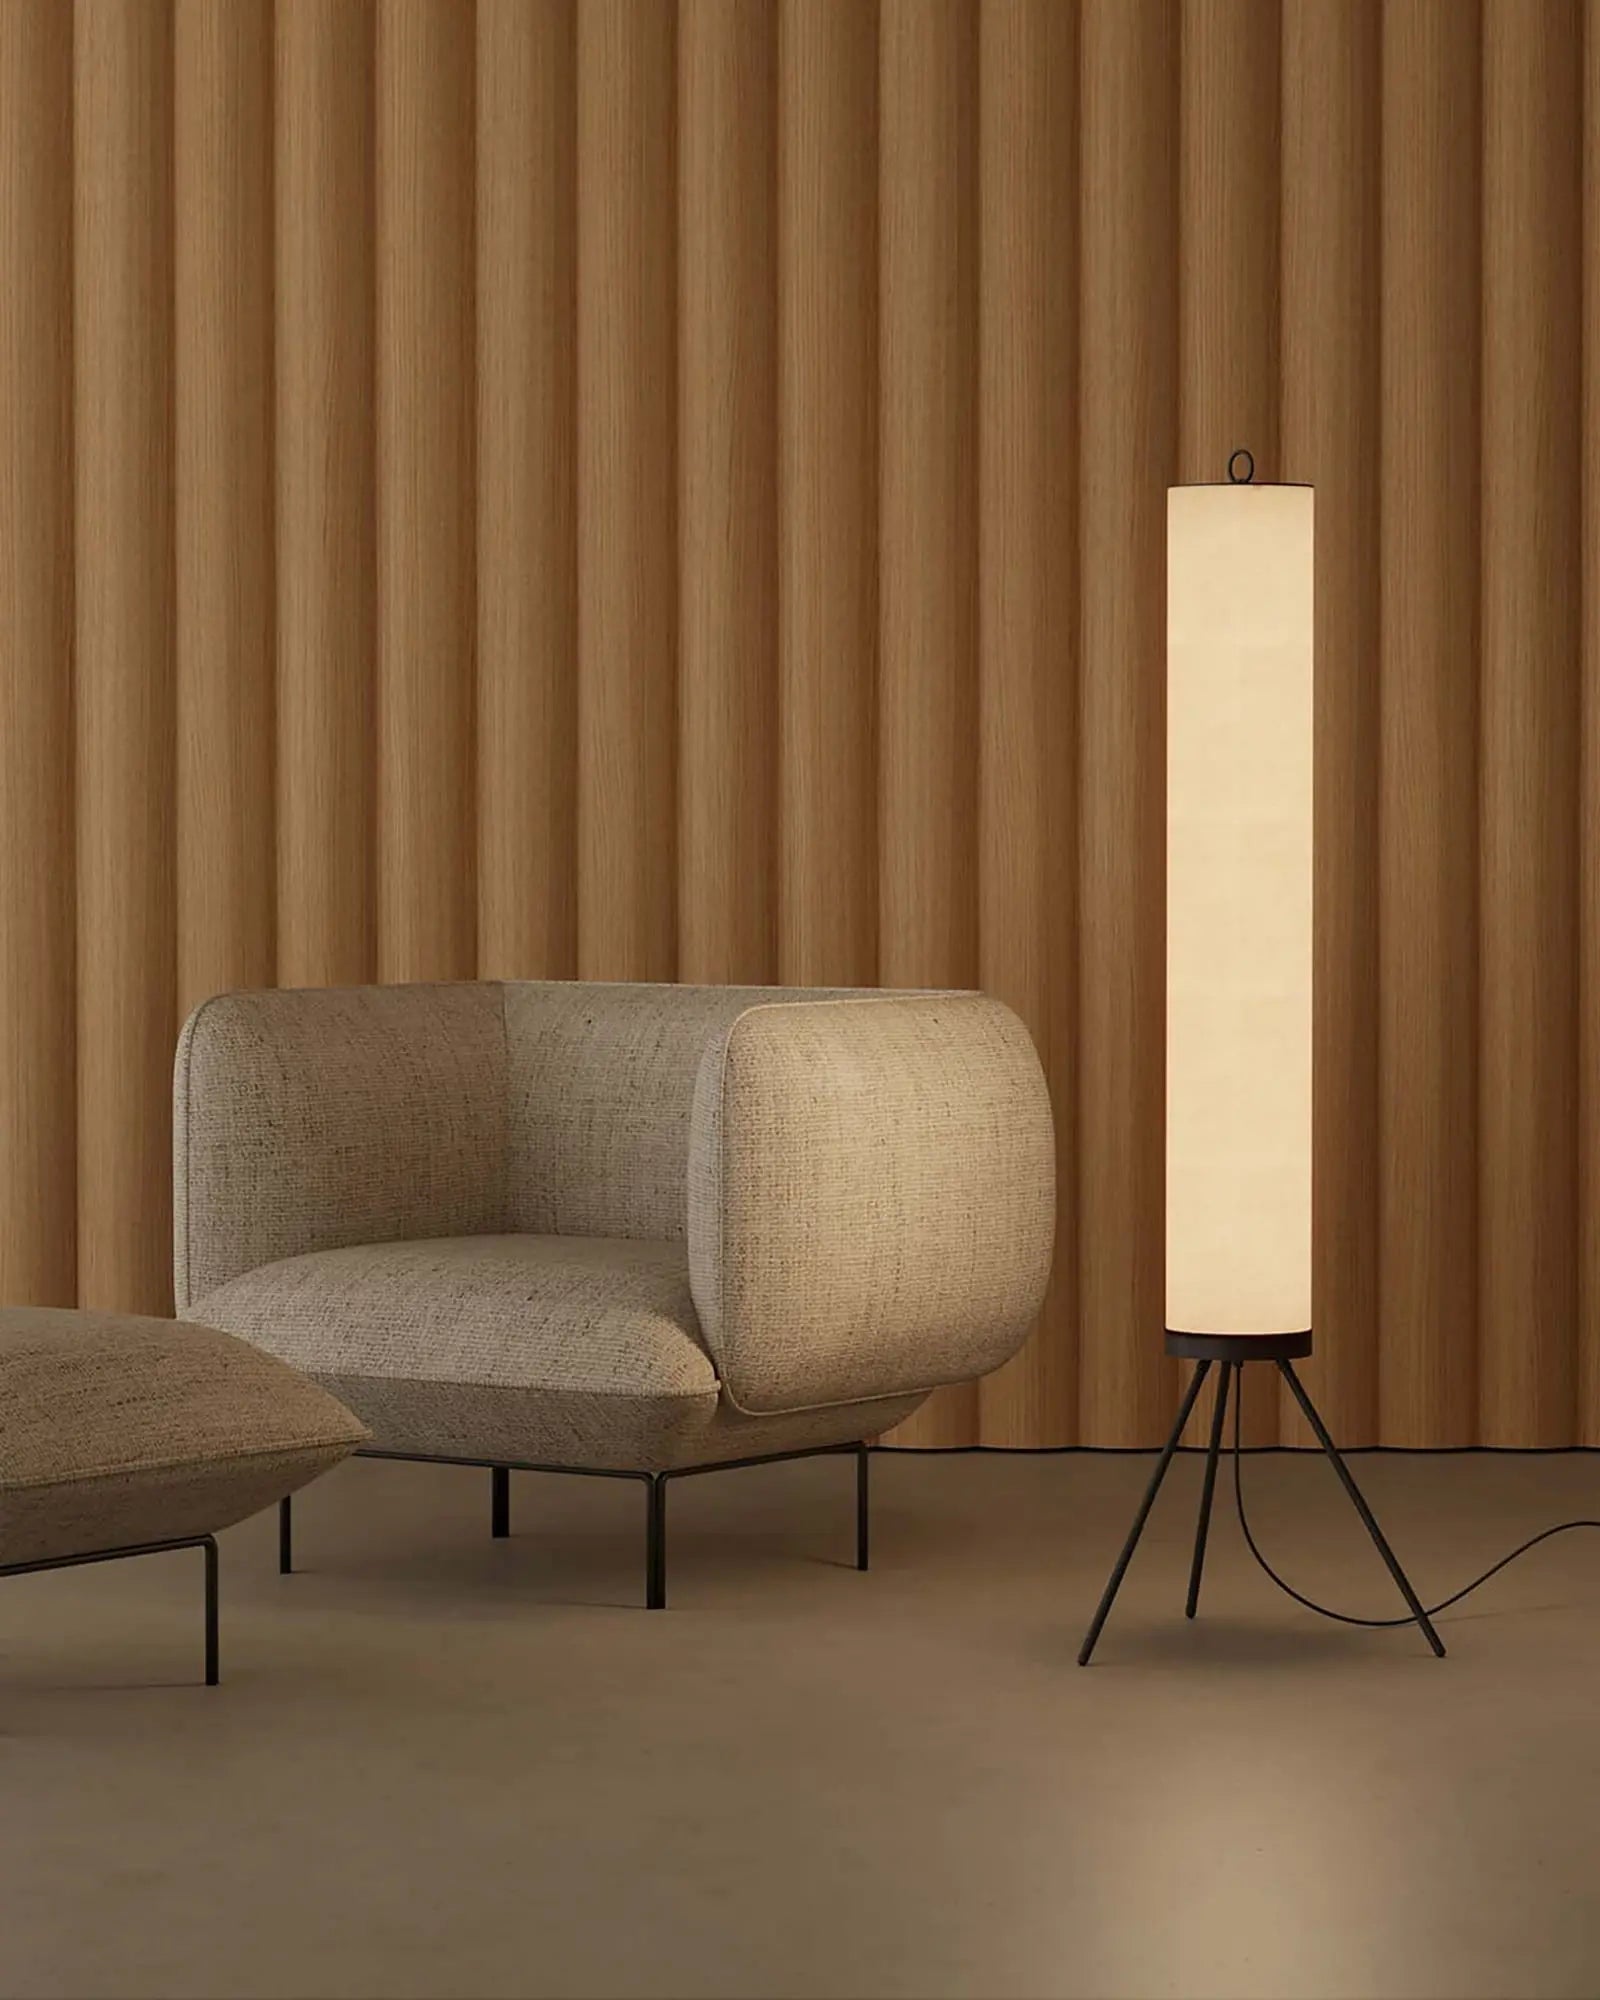 Nooi Floor lamp minimalistic cylinder with tripod base beside a sofa chair in lounge area